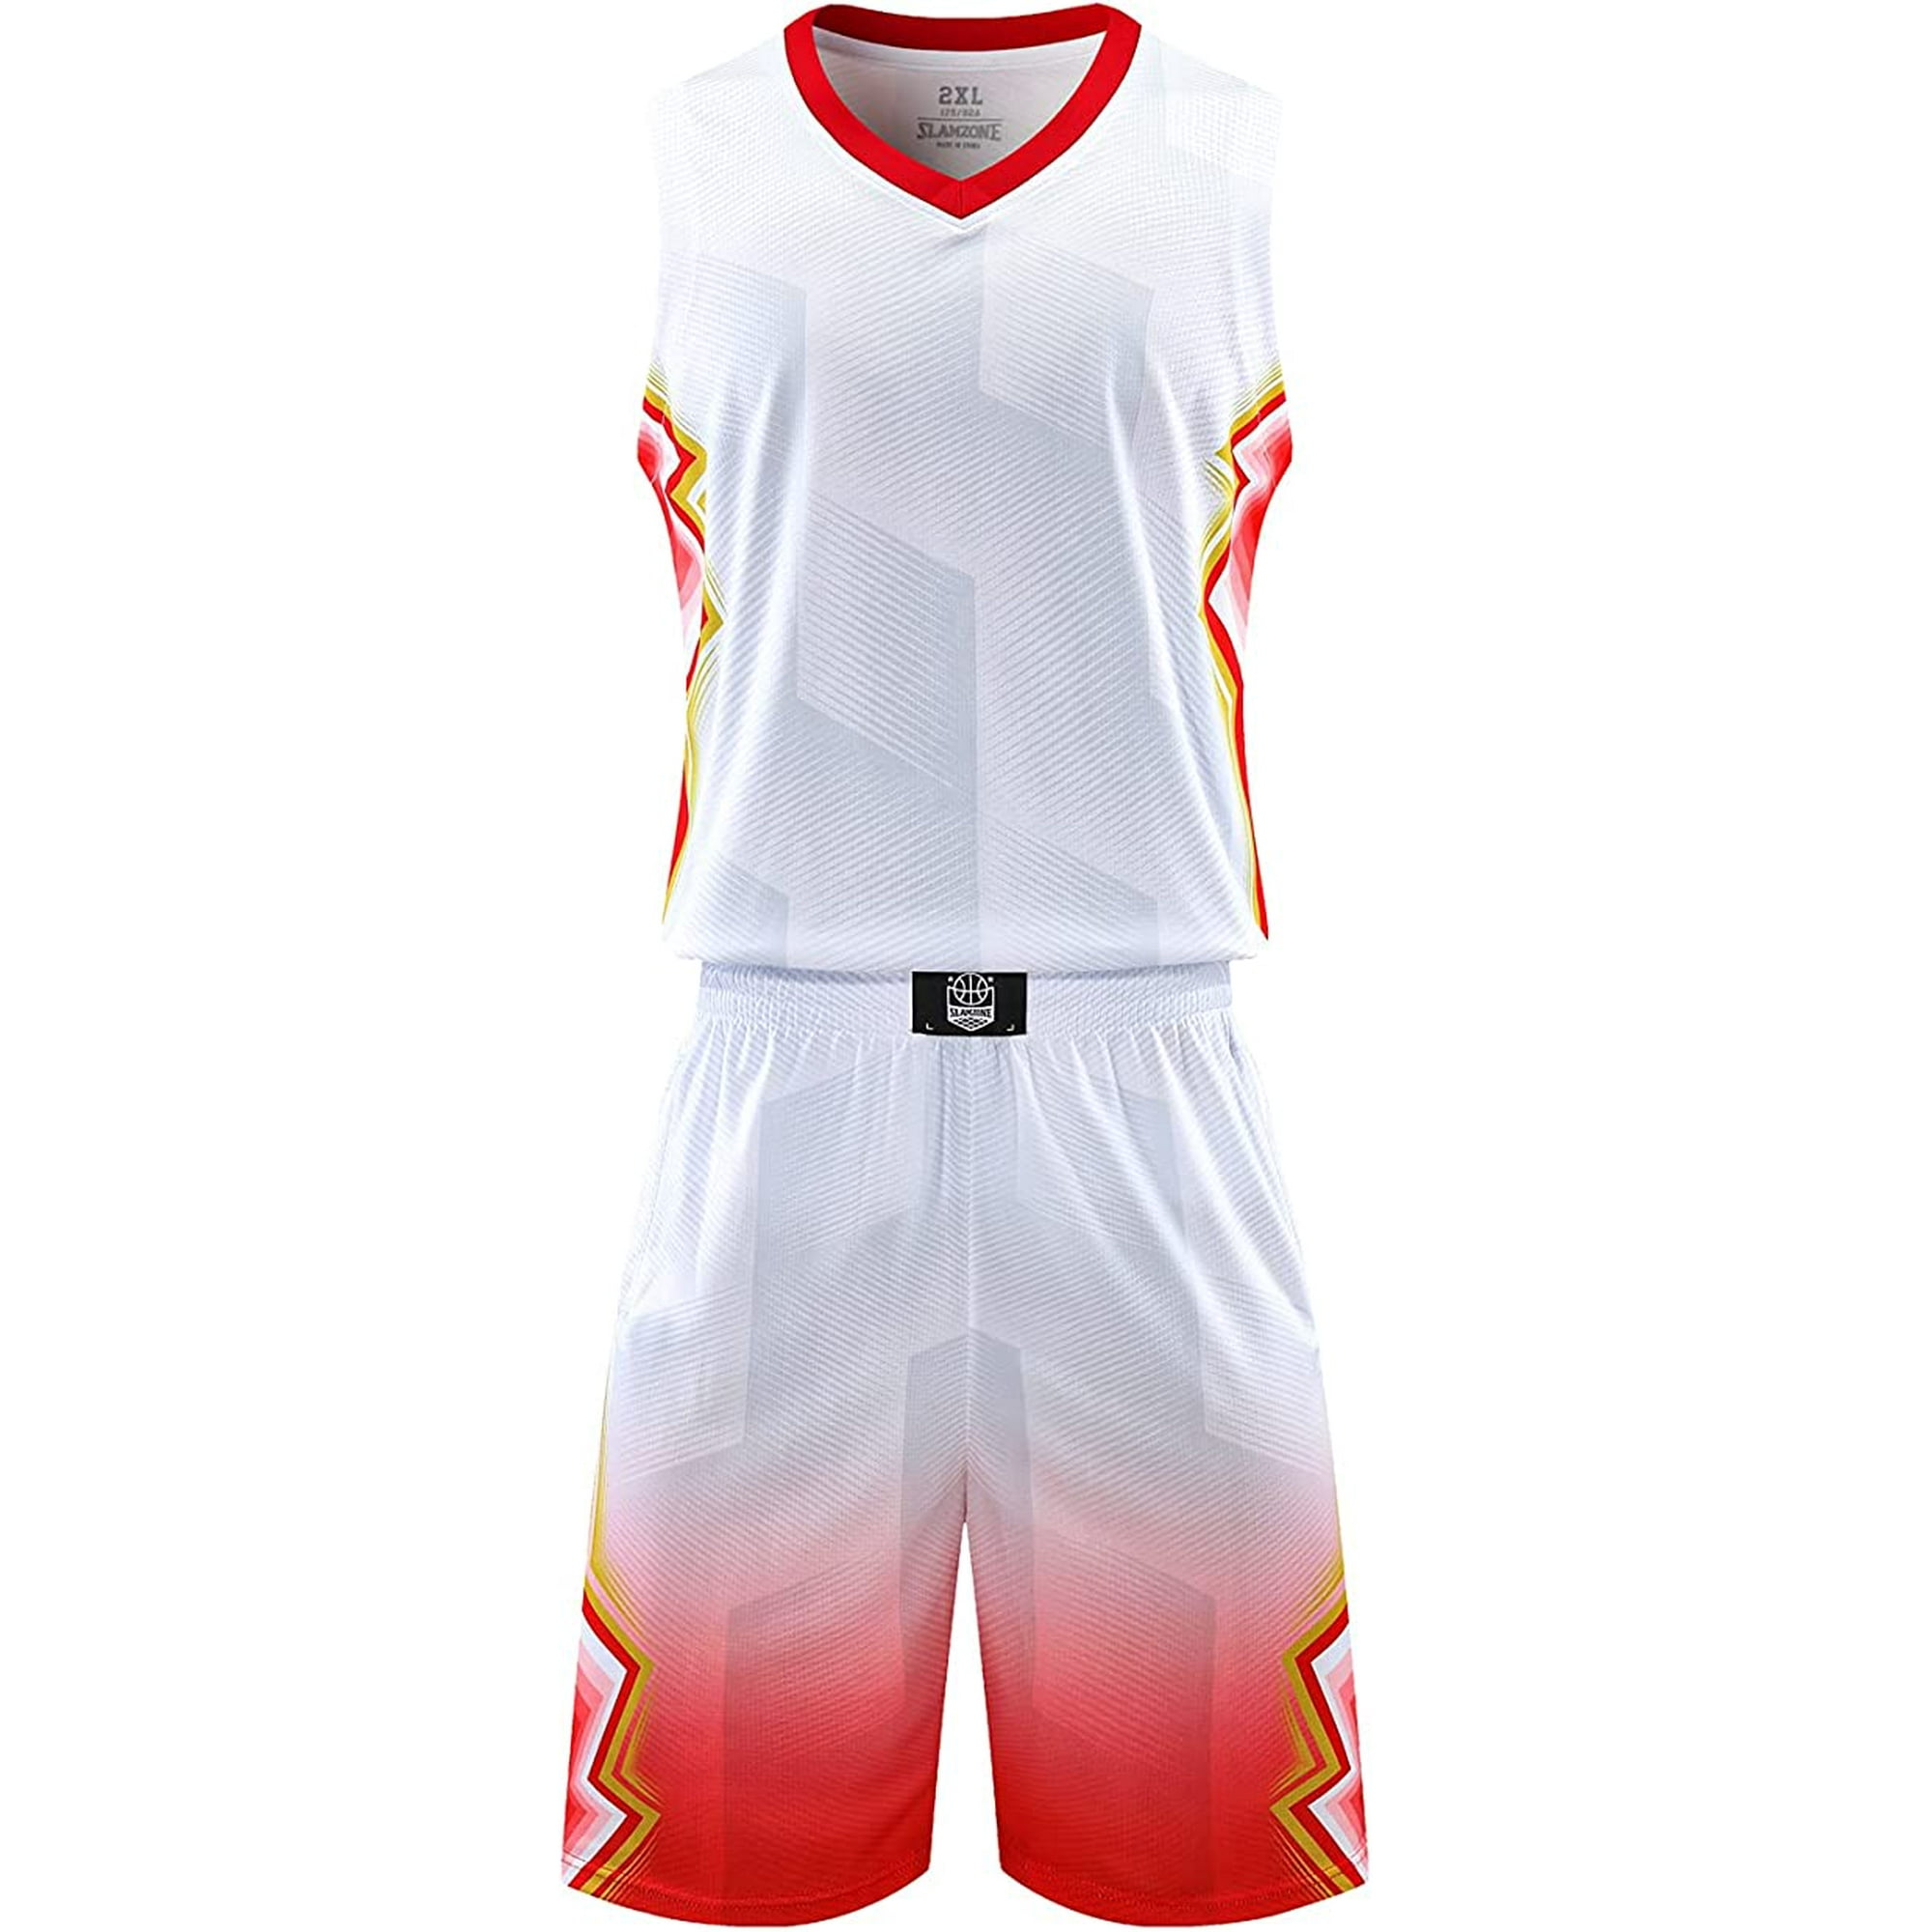 TIMPCV Men's Basketball Jerseys and Shorts Team Uniforms with Pockets  Tracksuit Uniforms white—M 